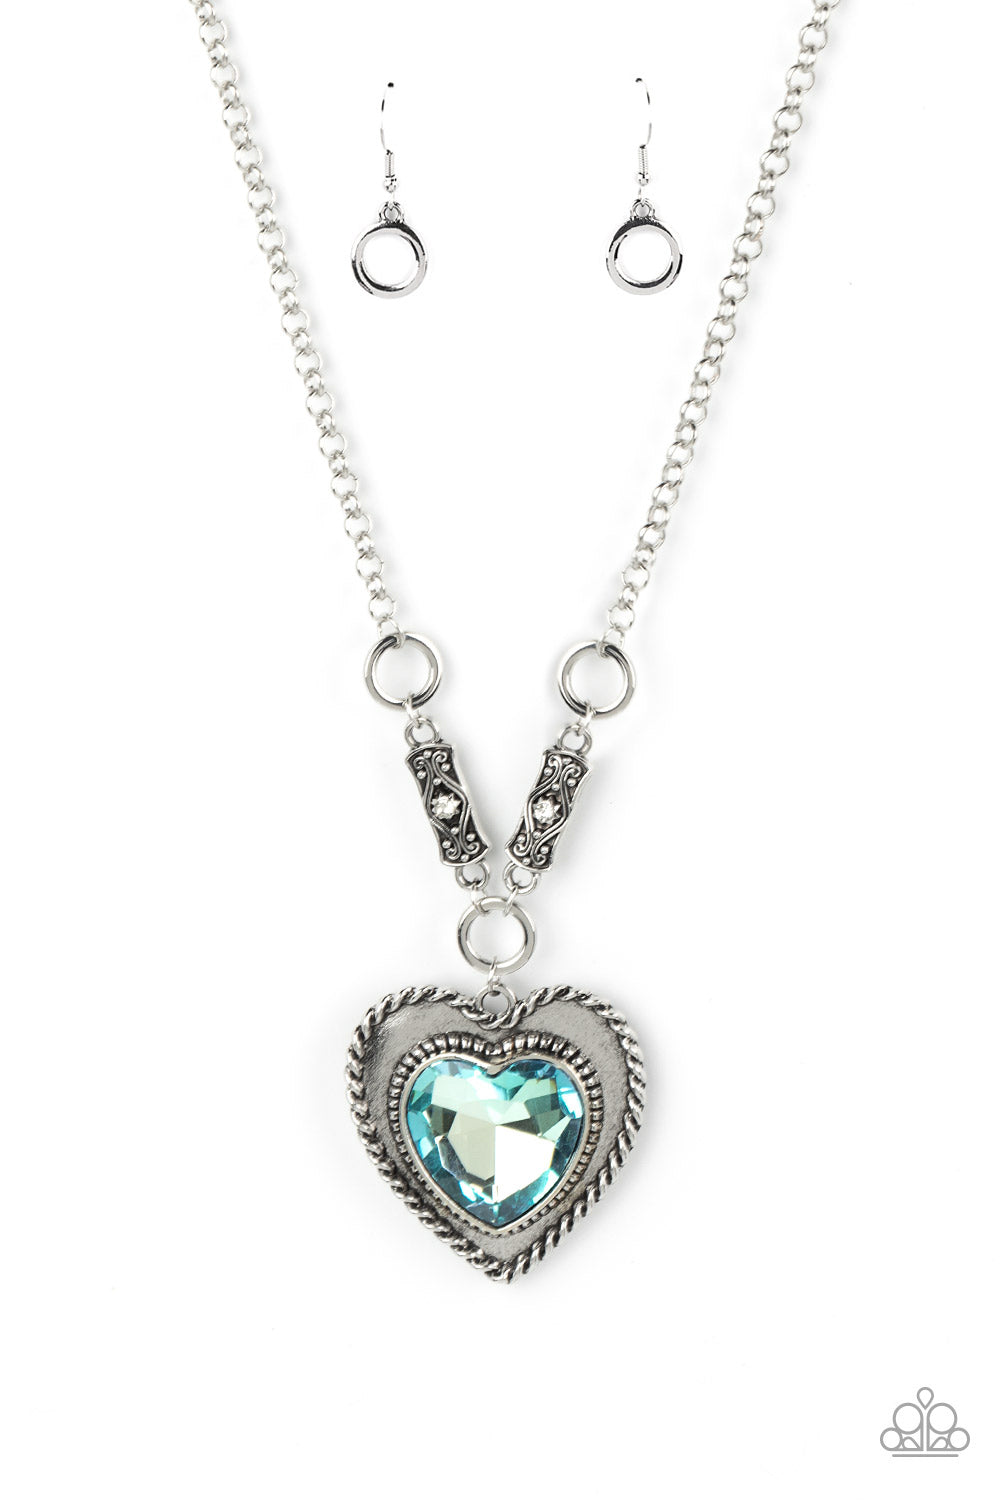 Heart Full of Fabulous - Blue Gem - Silver Necklace - Paparazzi Accessories - An oversized blue heart gem is pressed into a silver heart frame below the collar. The flirtatious pendant attaches to silver rings and decorative silver frames dotted in white rhinestones, resulting in a dash of vintage inspired romance. Features an adjustable clasp closure.